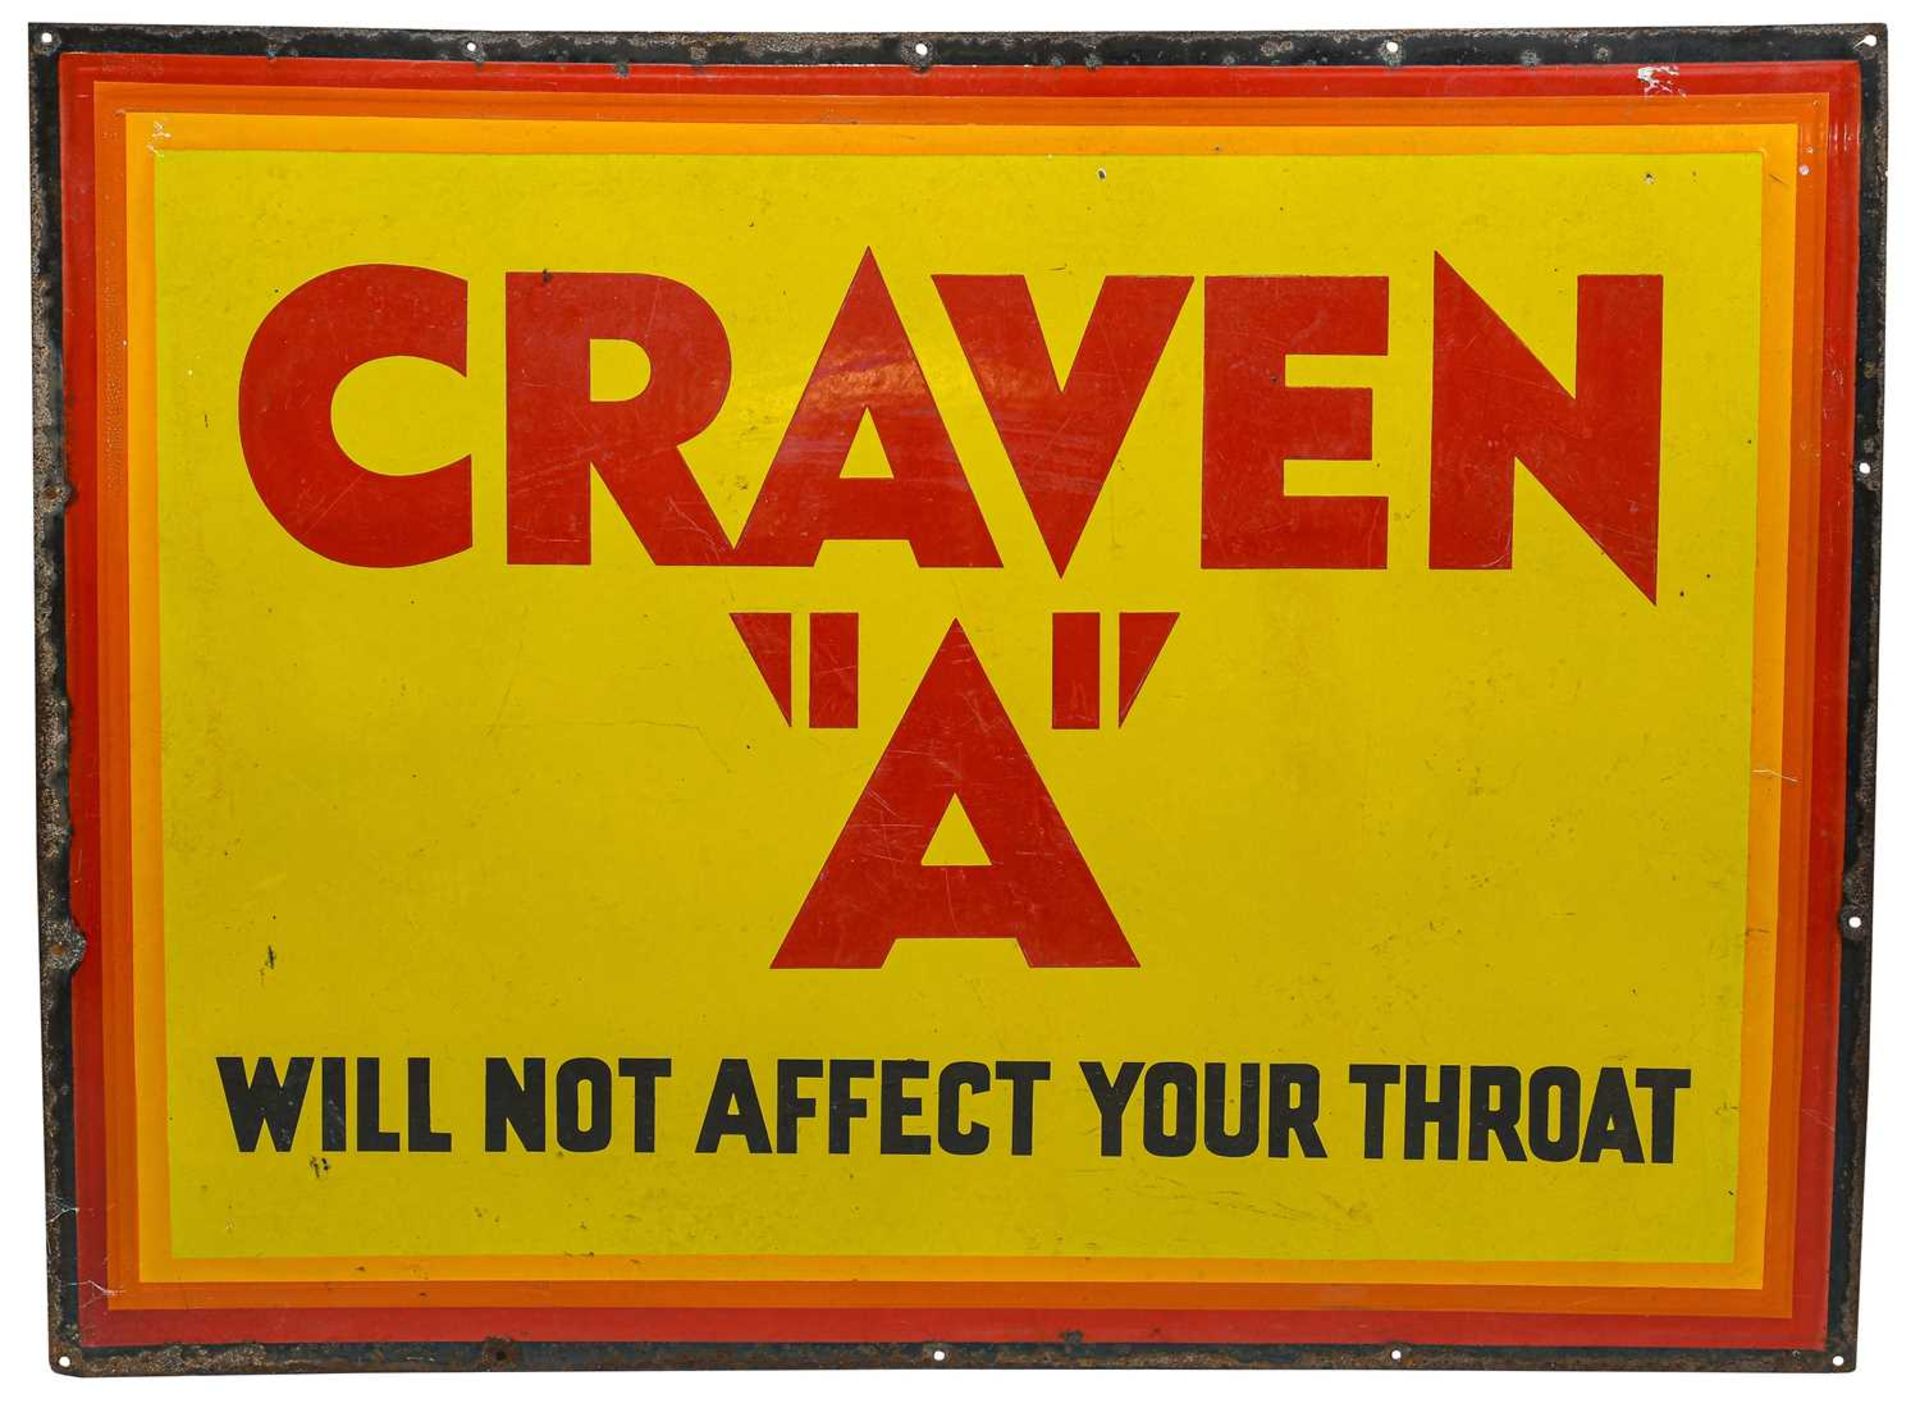 Craven "A" Will Not Affect Your Throat: A Single-Sided Enamel Advertising Sign, 77cm by 102cm